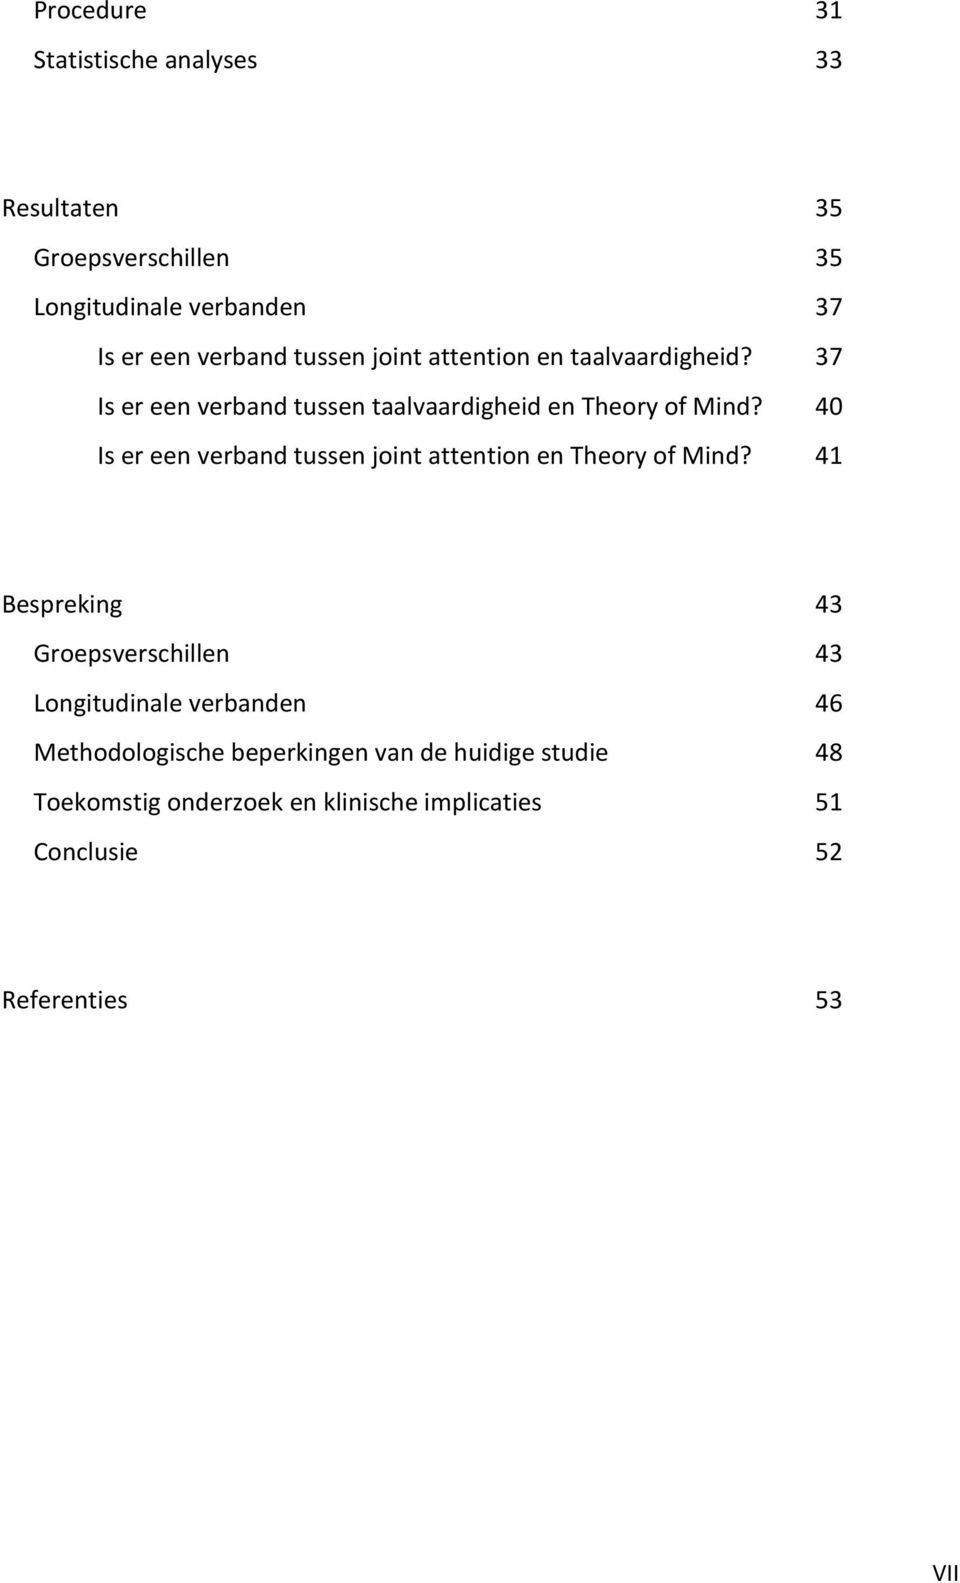 Is er een verband tussen joint attention en Theory of Mind?